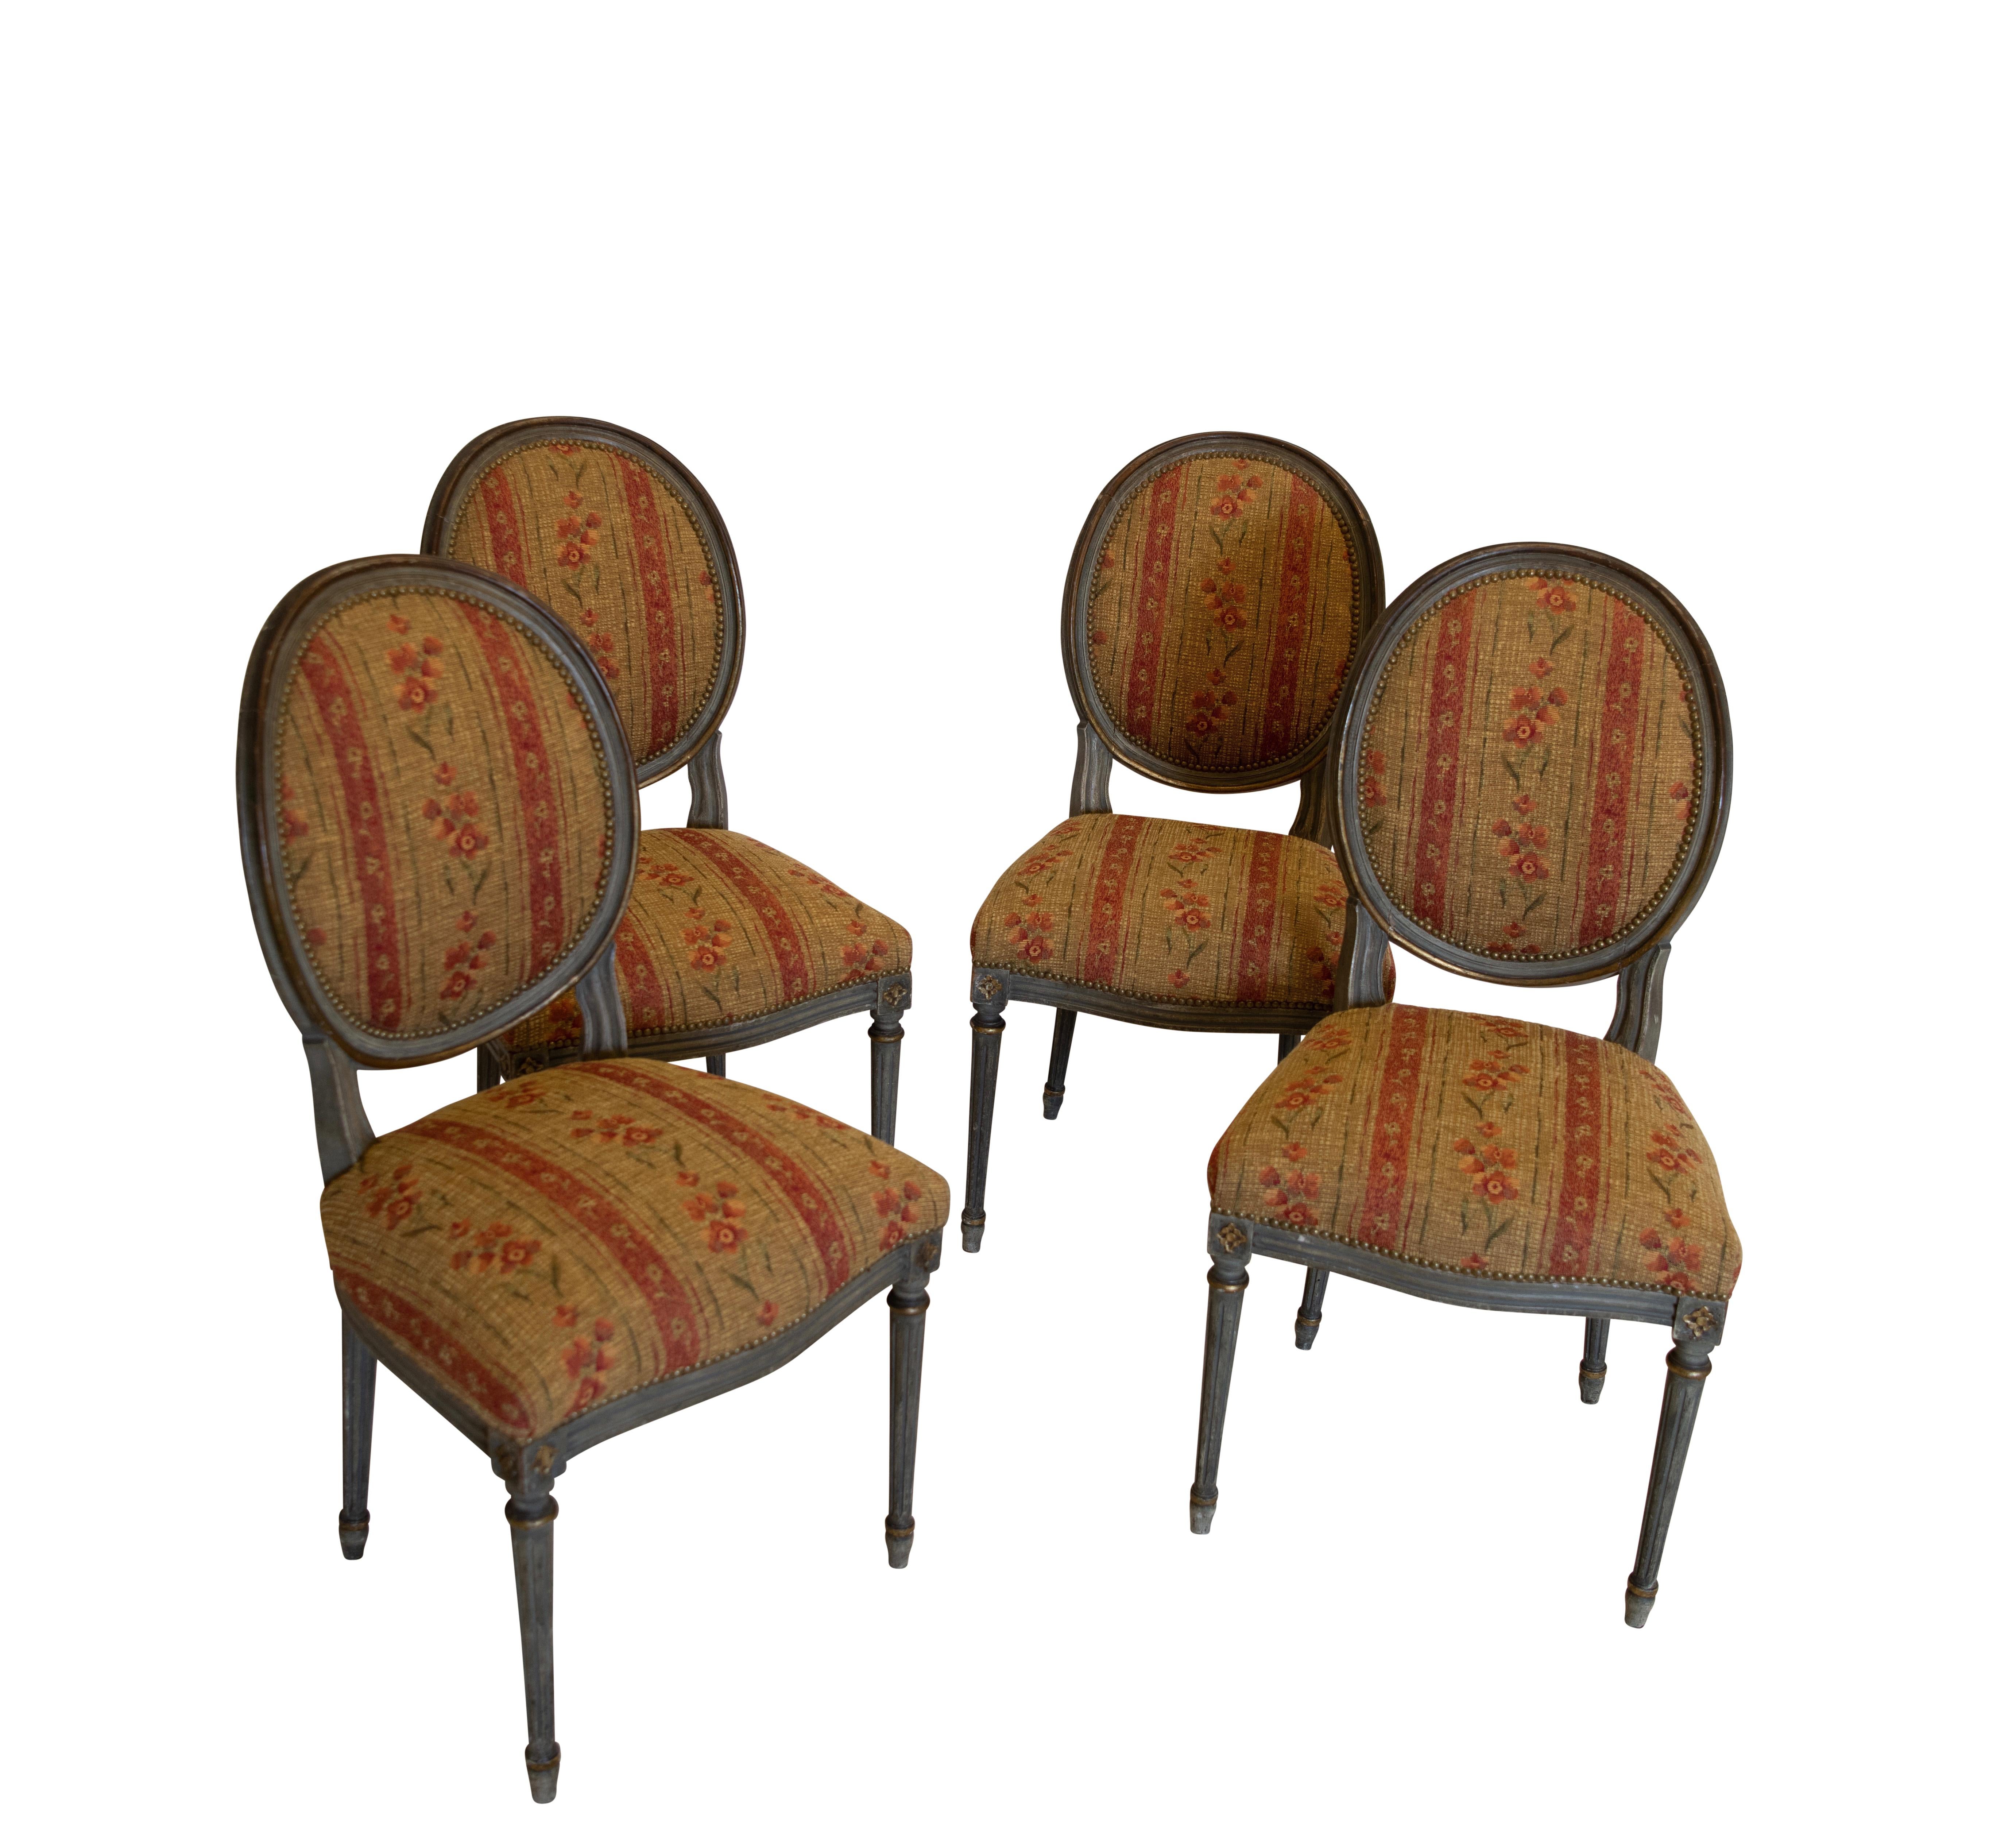 A set of four Louis XVI style upholstered side chairs. Having original paint and upholstered in vintage fabric in good condition. France, late 19th-early 20th century.